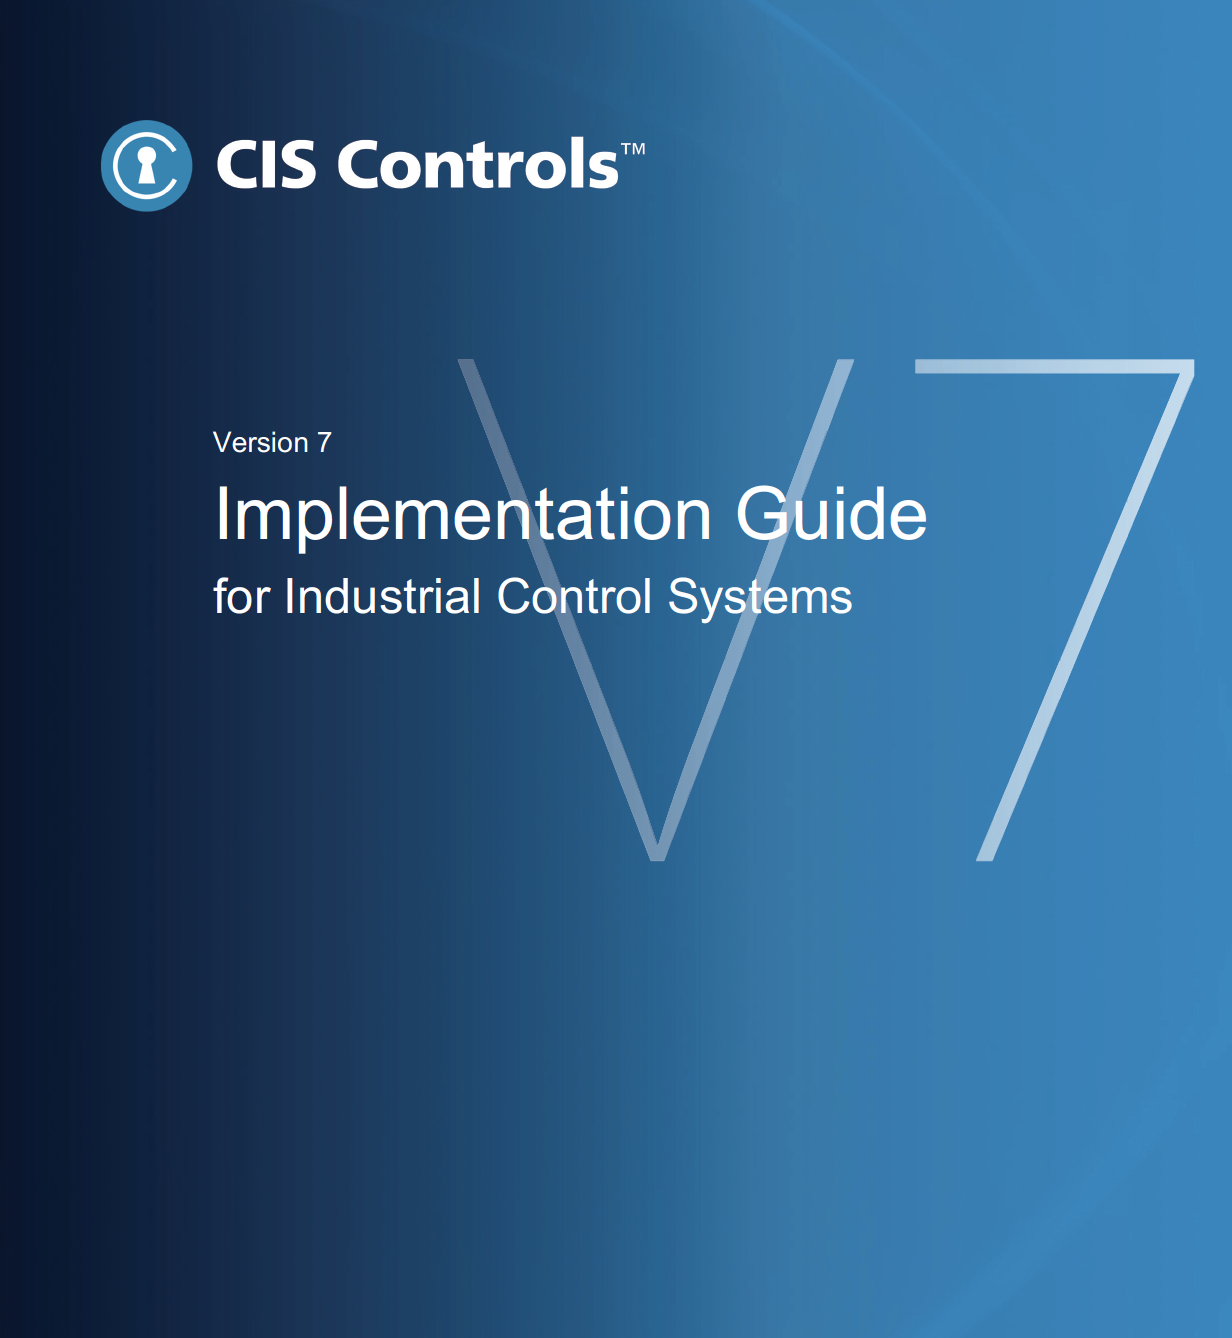 Implementation Guide for ICS using the CIS Controls cover photo